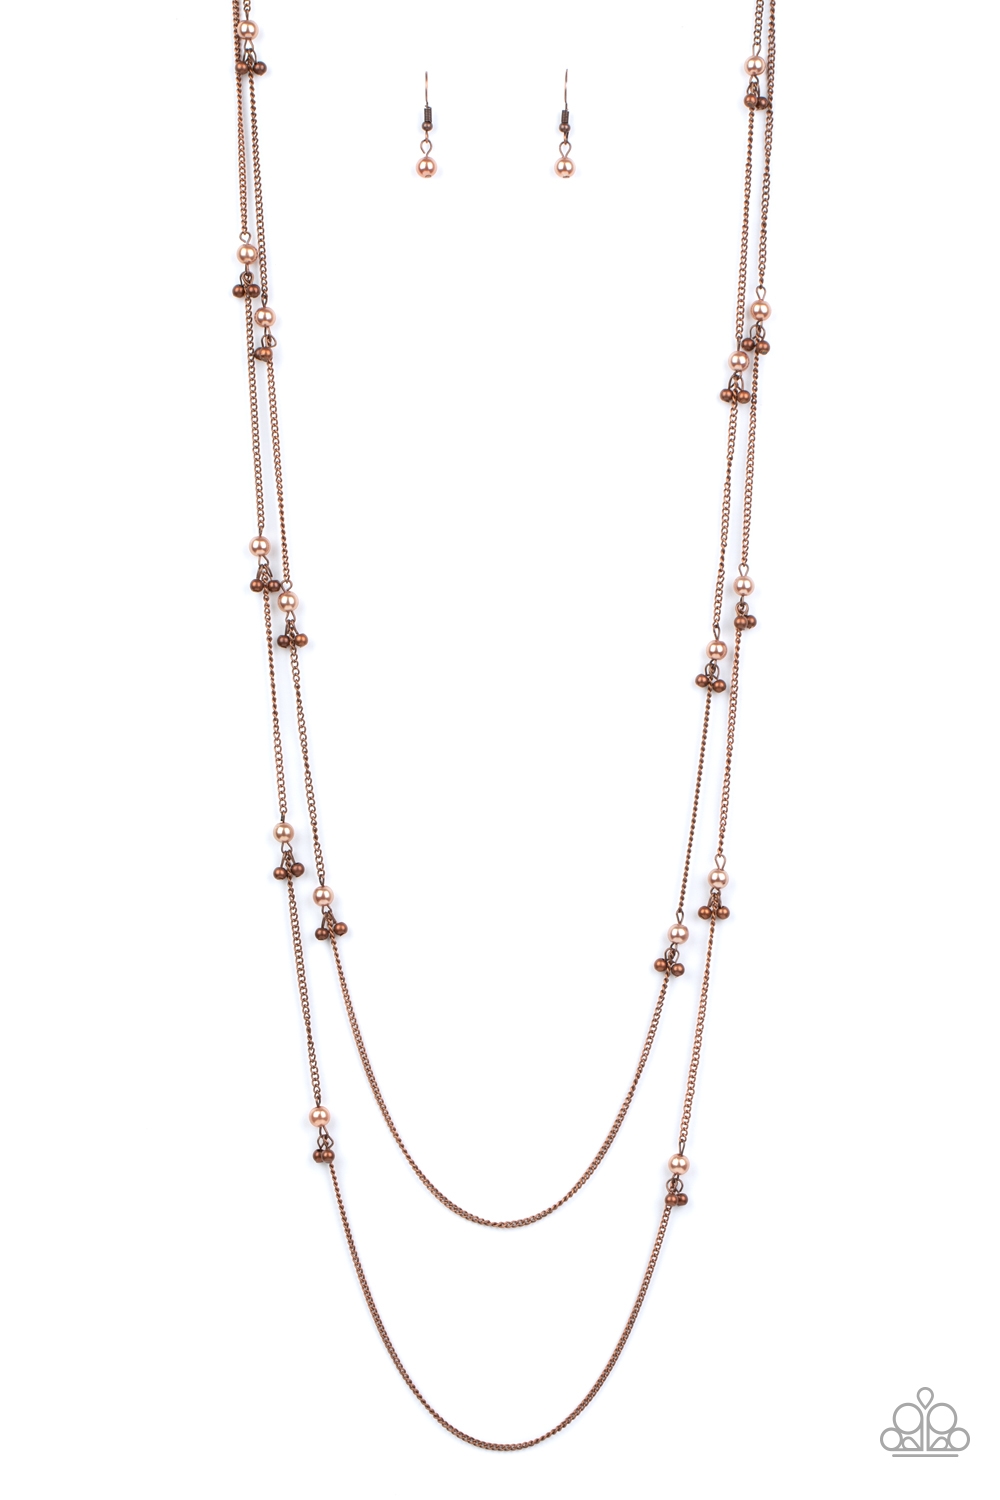 Necklace - Ultrawealthy - Copper